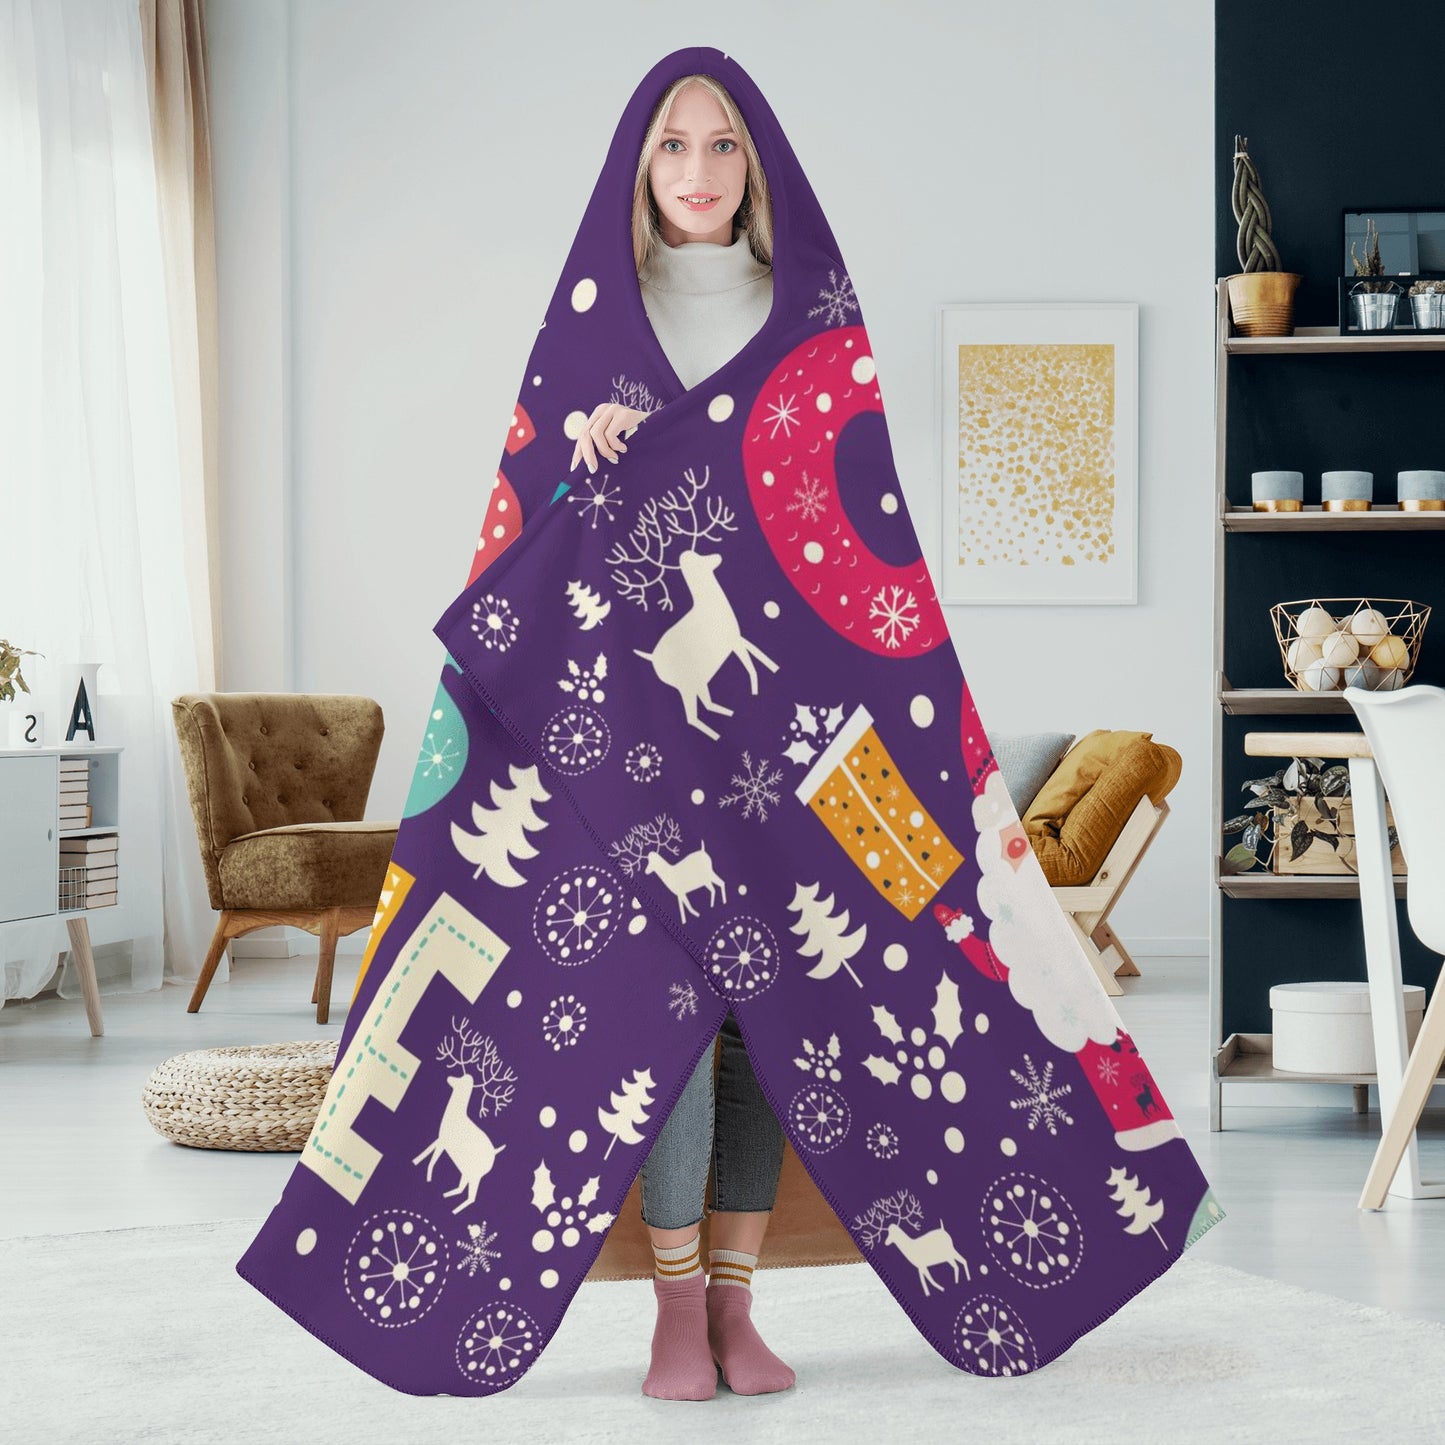 Its a Christmas Time Hooded Blanket